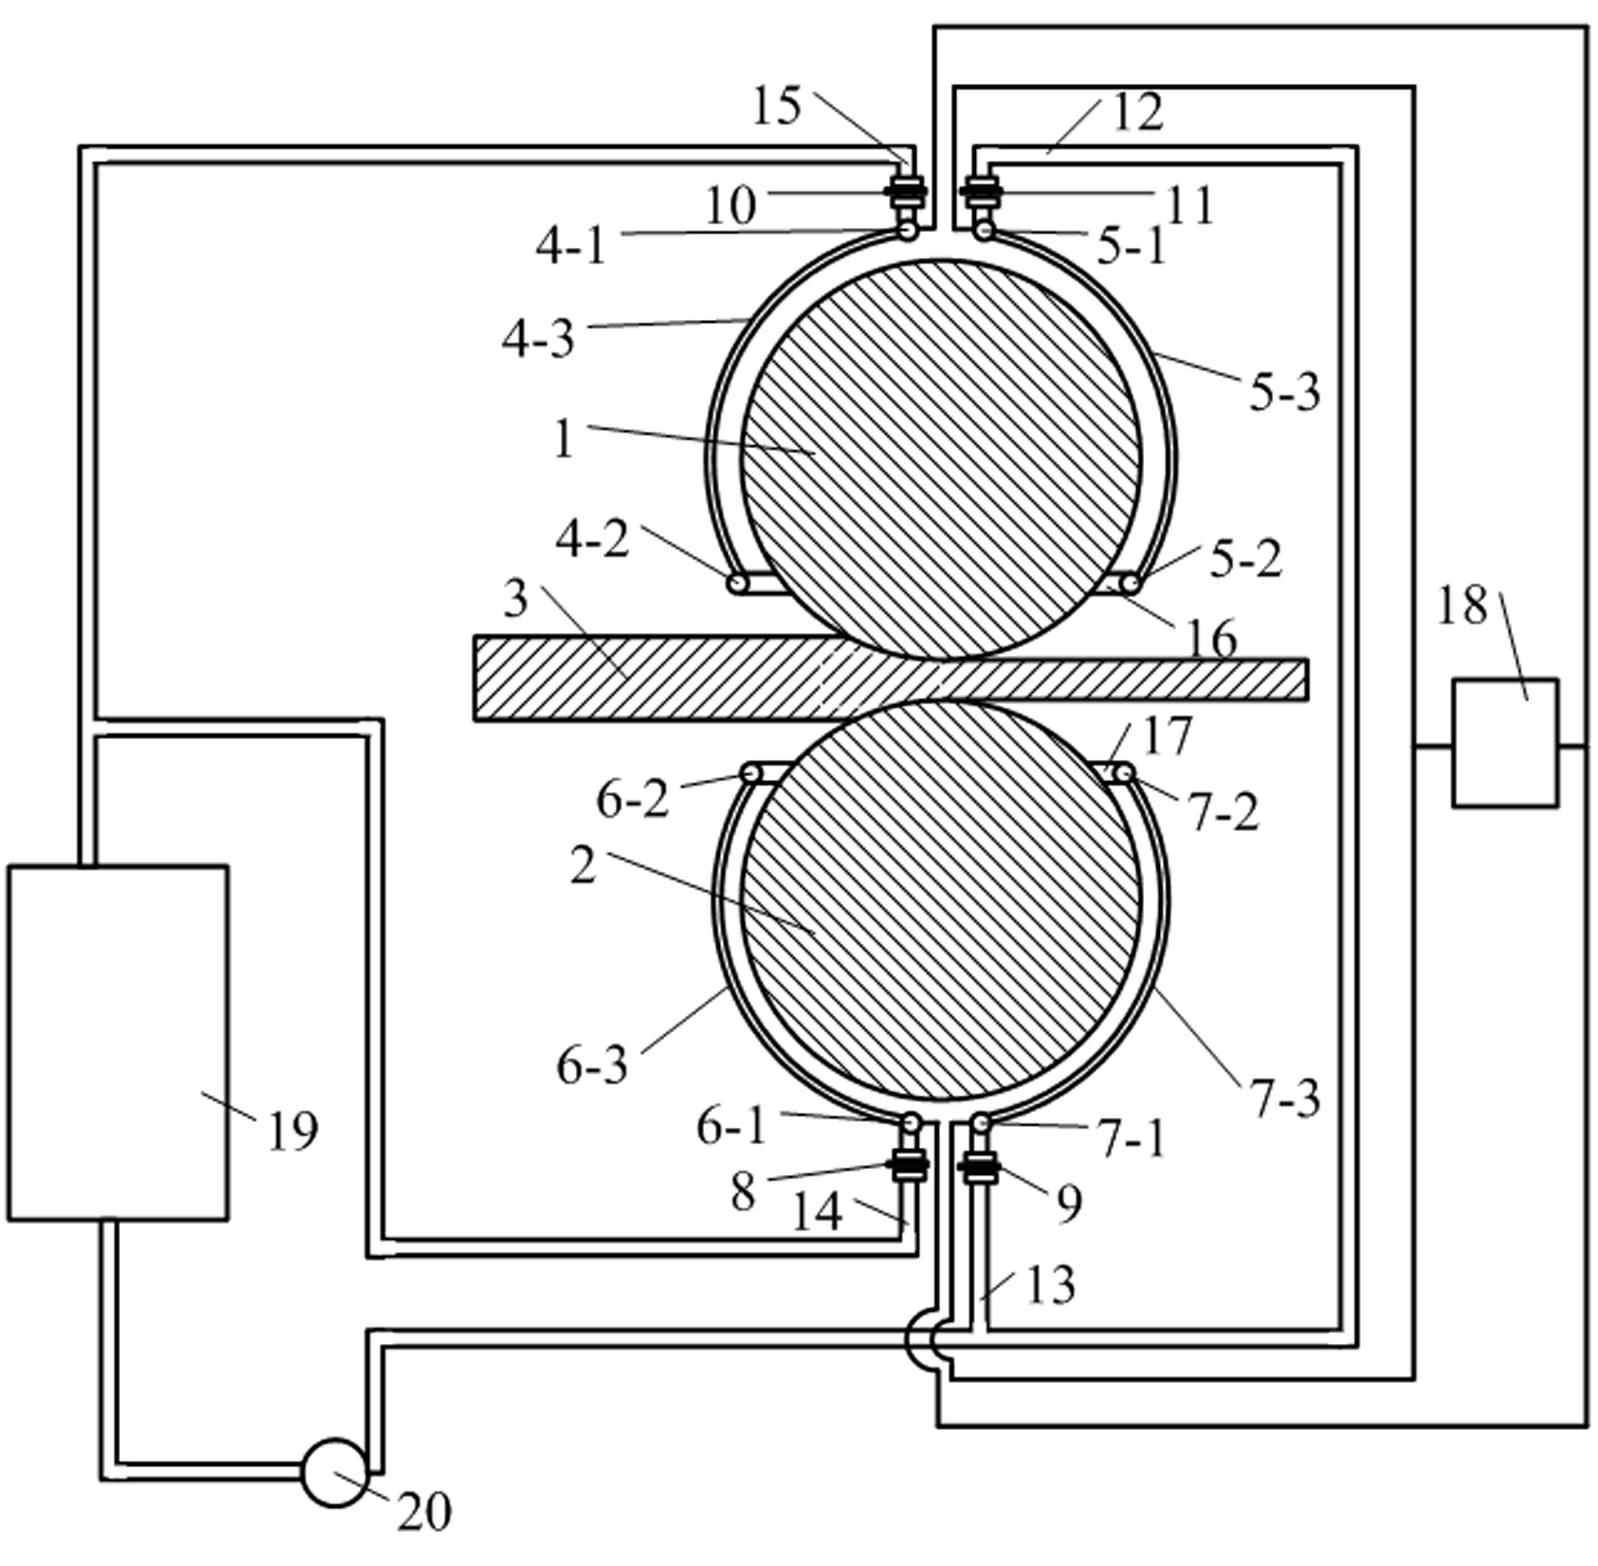 Hot roller warm-rolling device and method for metal plates and strips